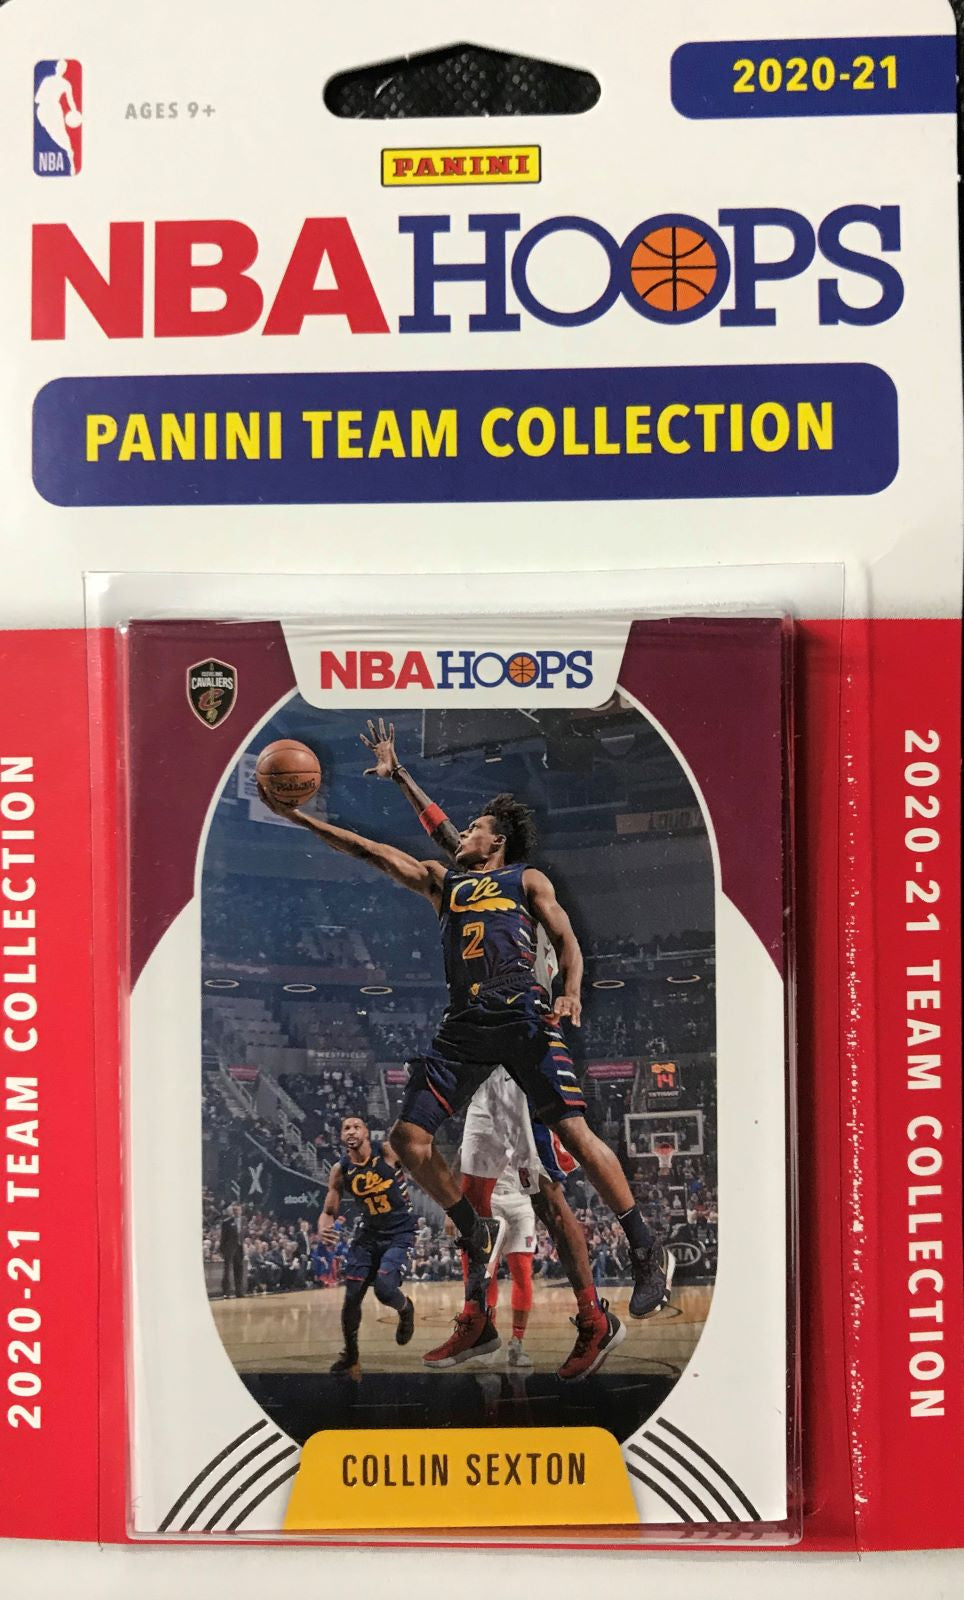 Cleveland Cavaliers 2020 2021 Hoops Factory Sealed Team Set with Isaac Okoro Rookie card